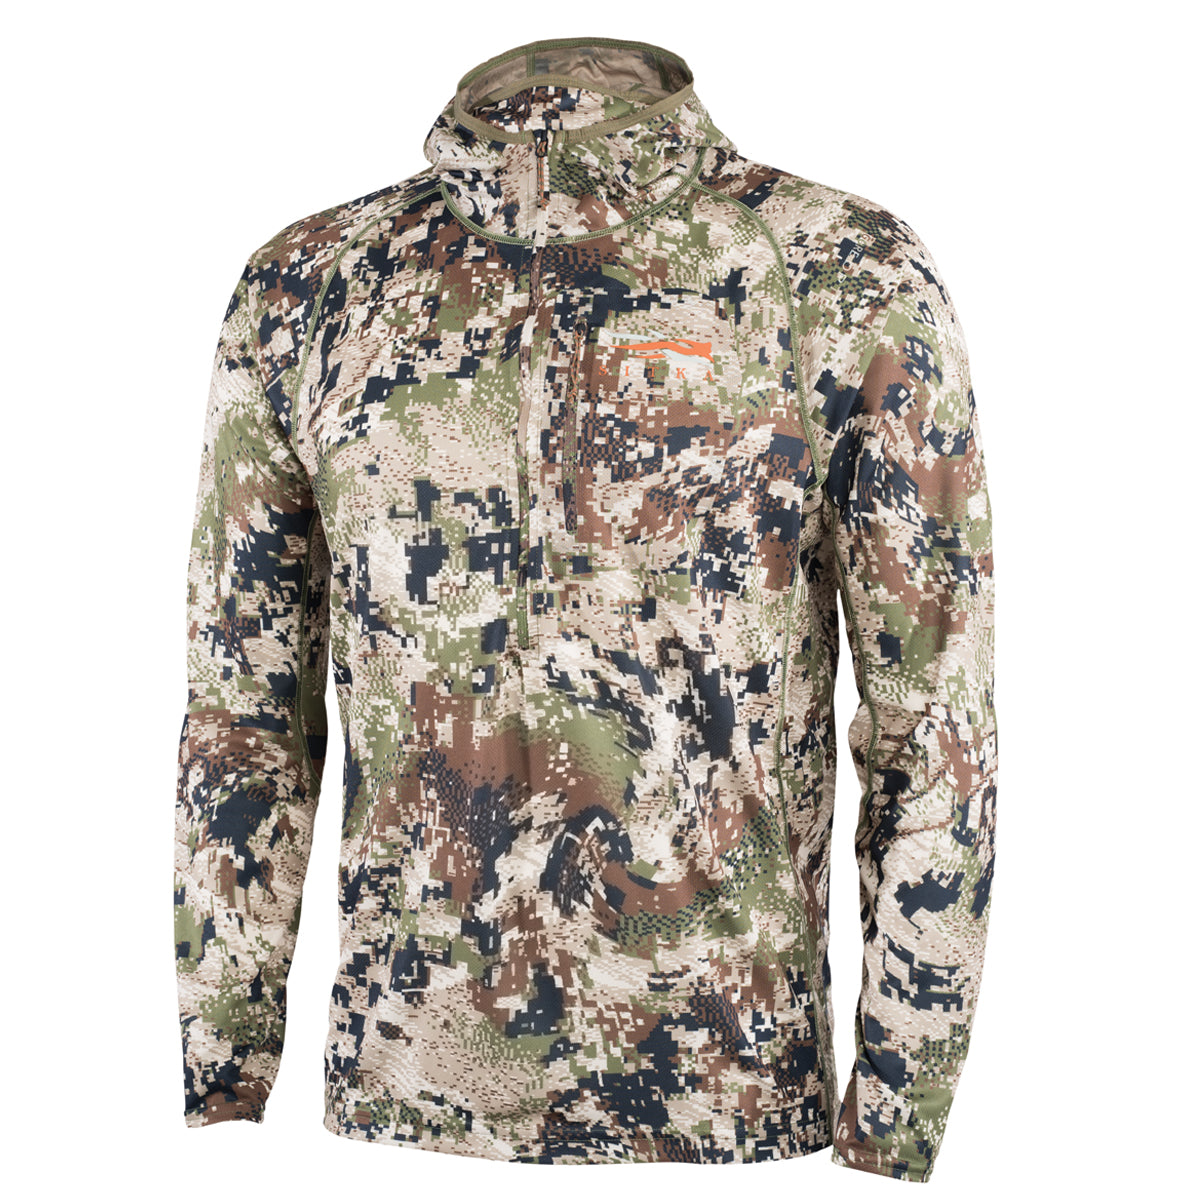 Sitka Core Lightweight Hoody in Sitka Core Lightweight Hoody by Sitka | Apparel - goHUNT Shop by GOHUNT | Sitka - GOHUNT Shop